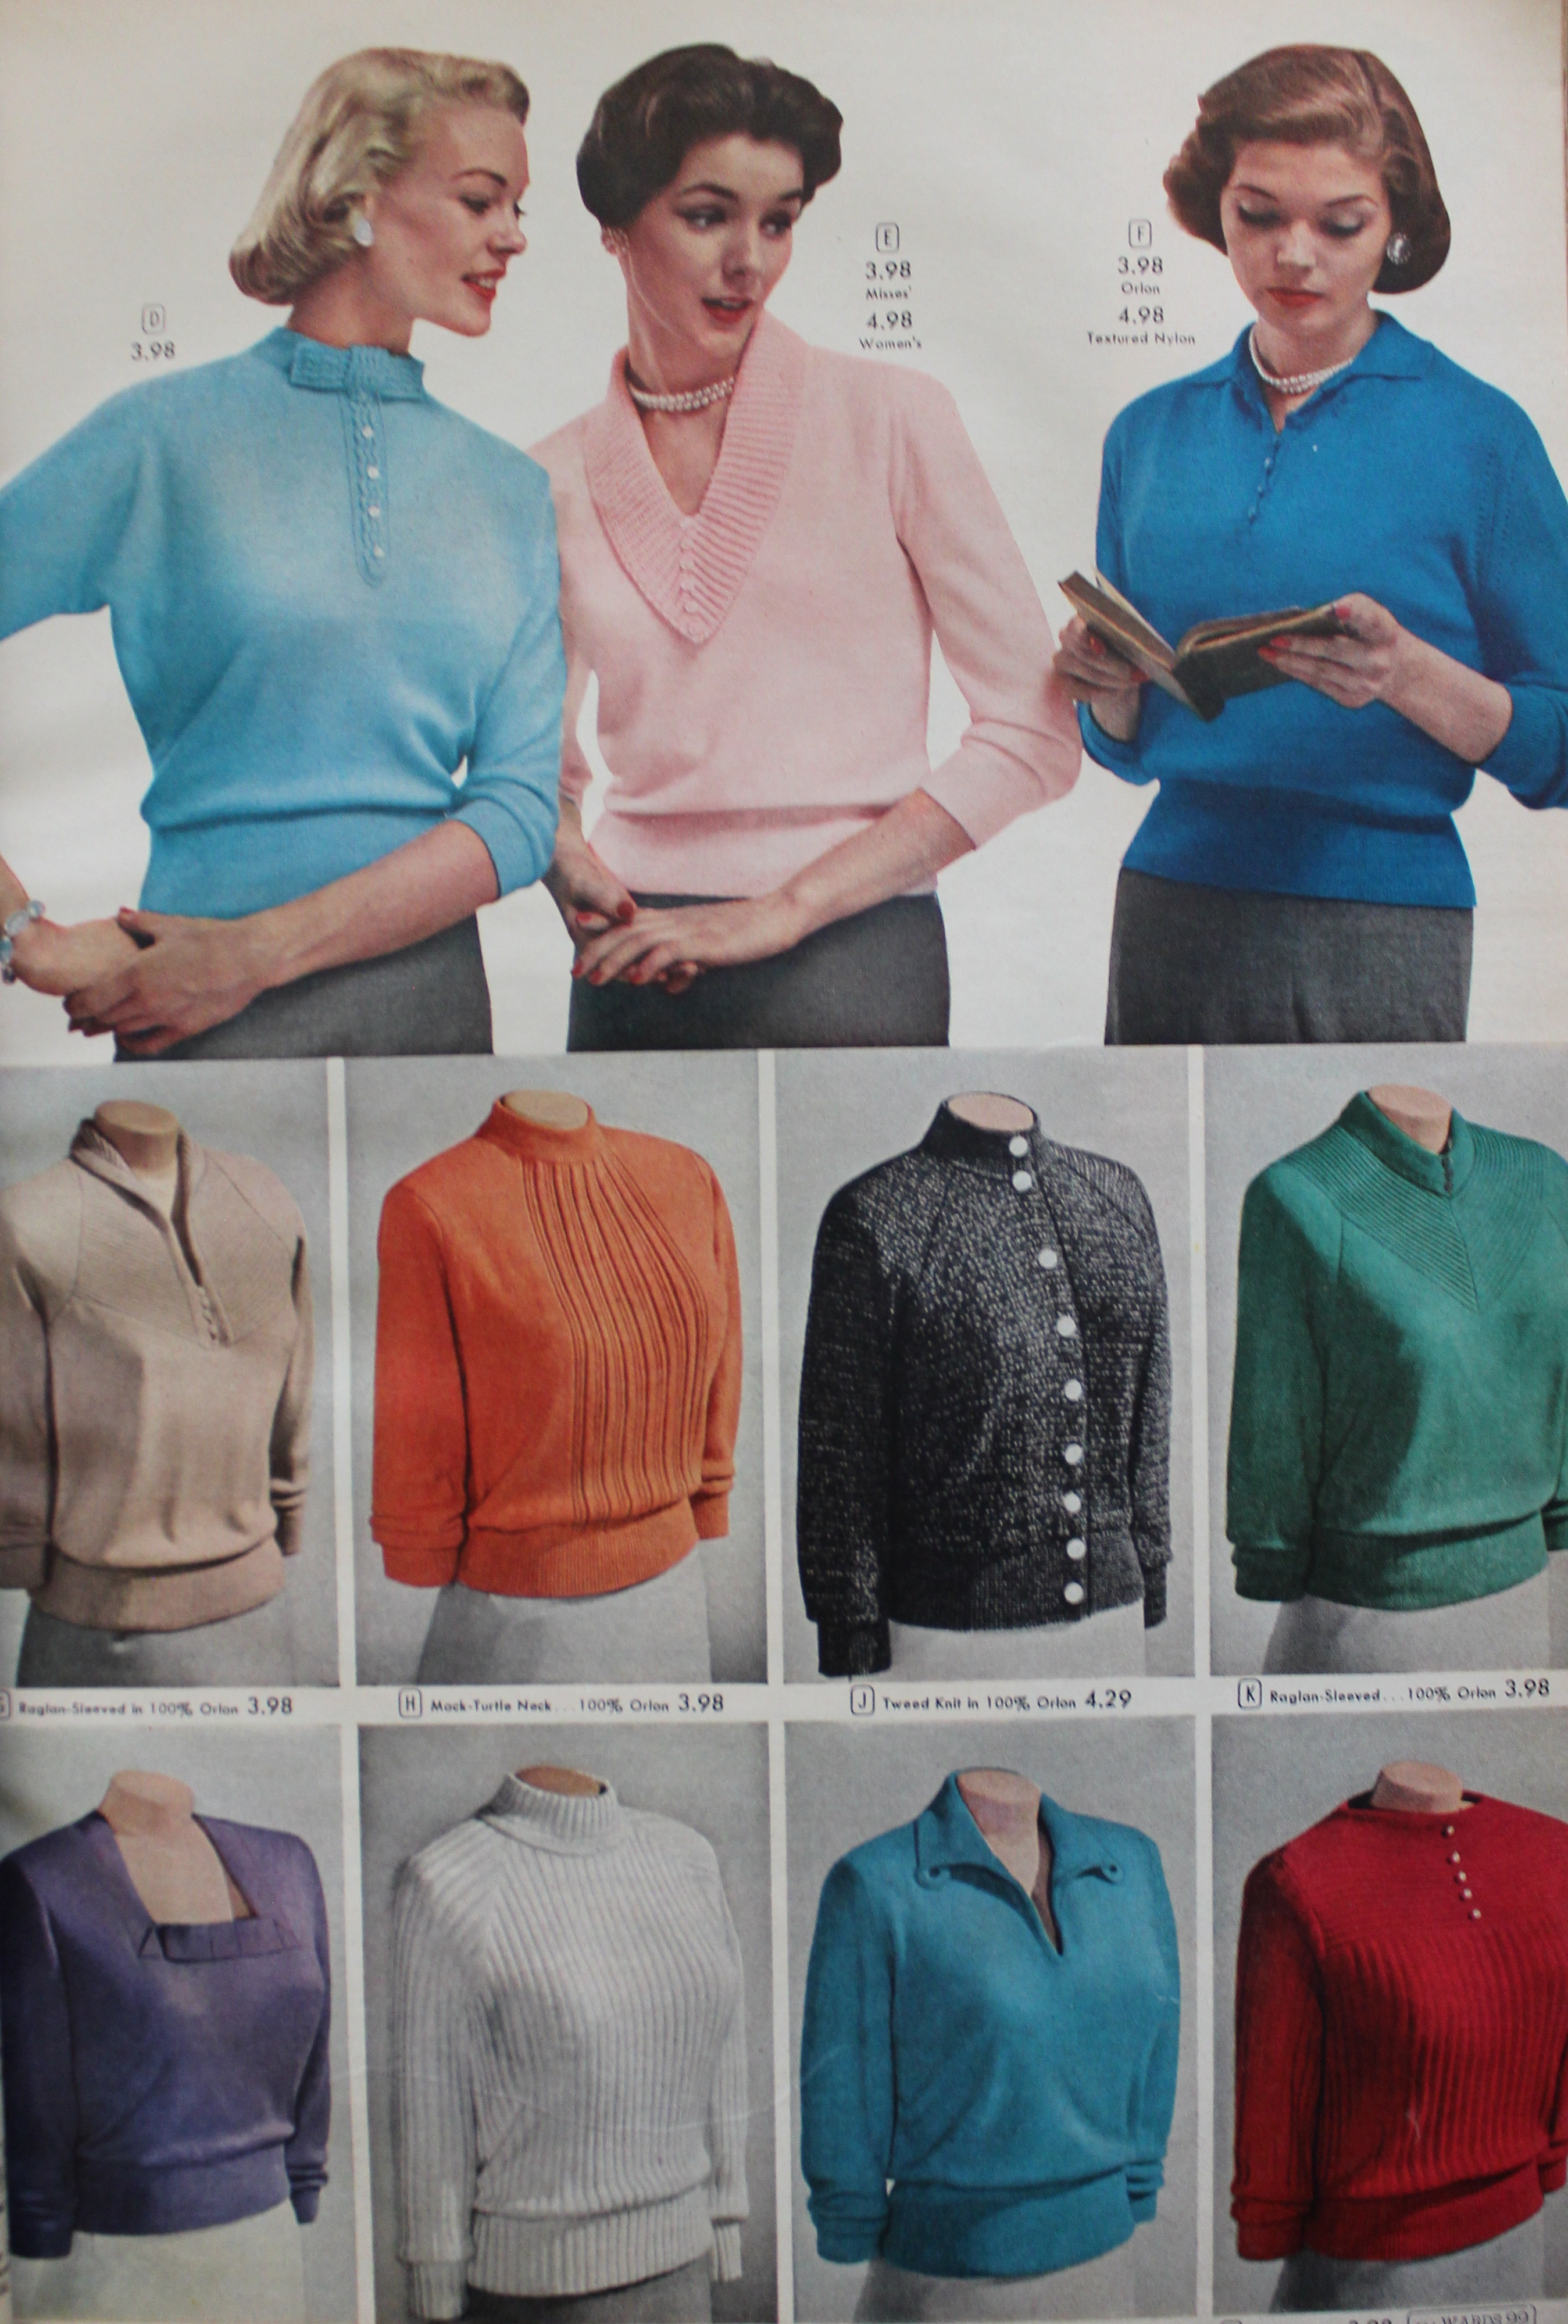 1950s Tops: Shirts, Sweaters, Jackets History